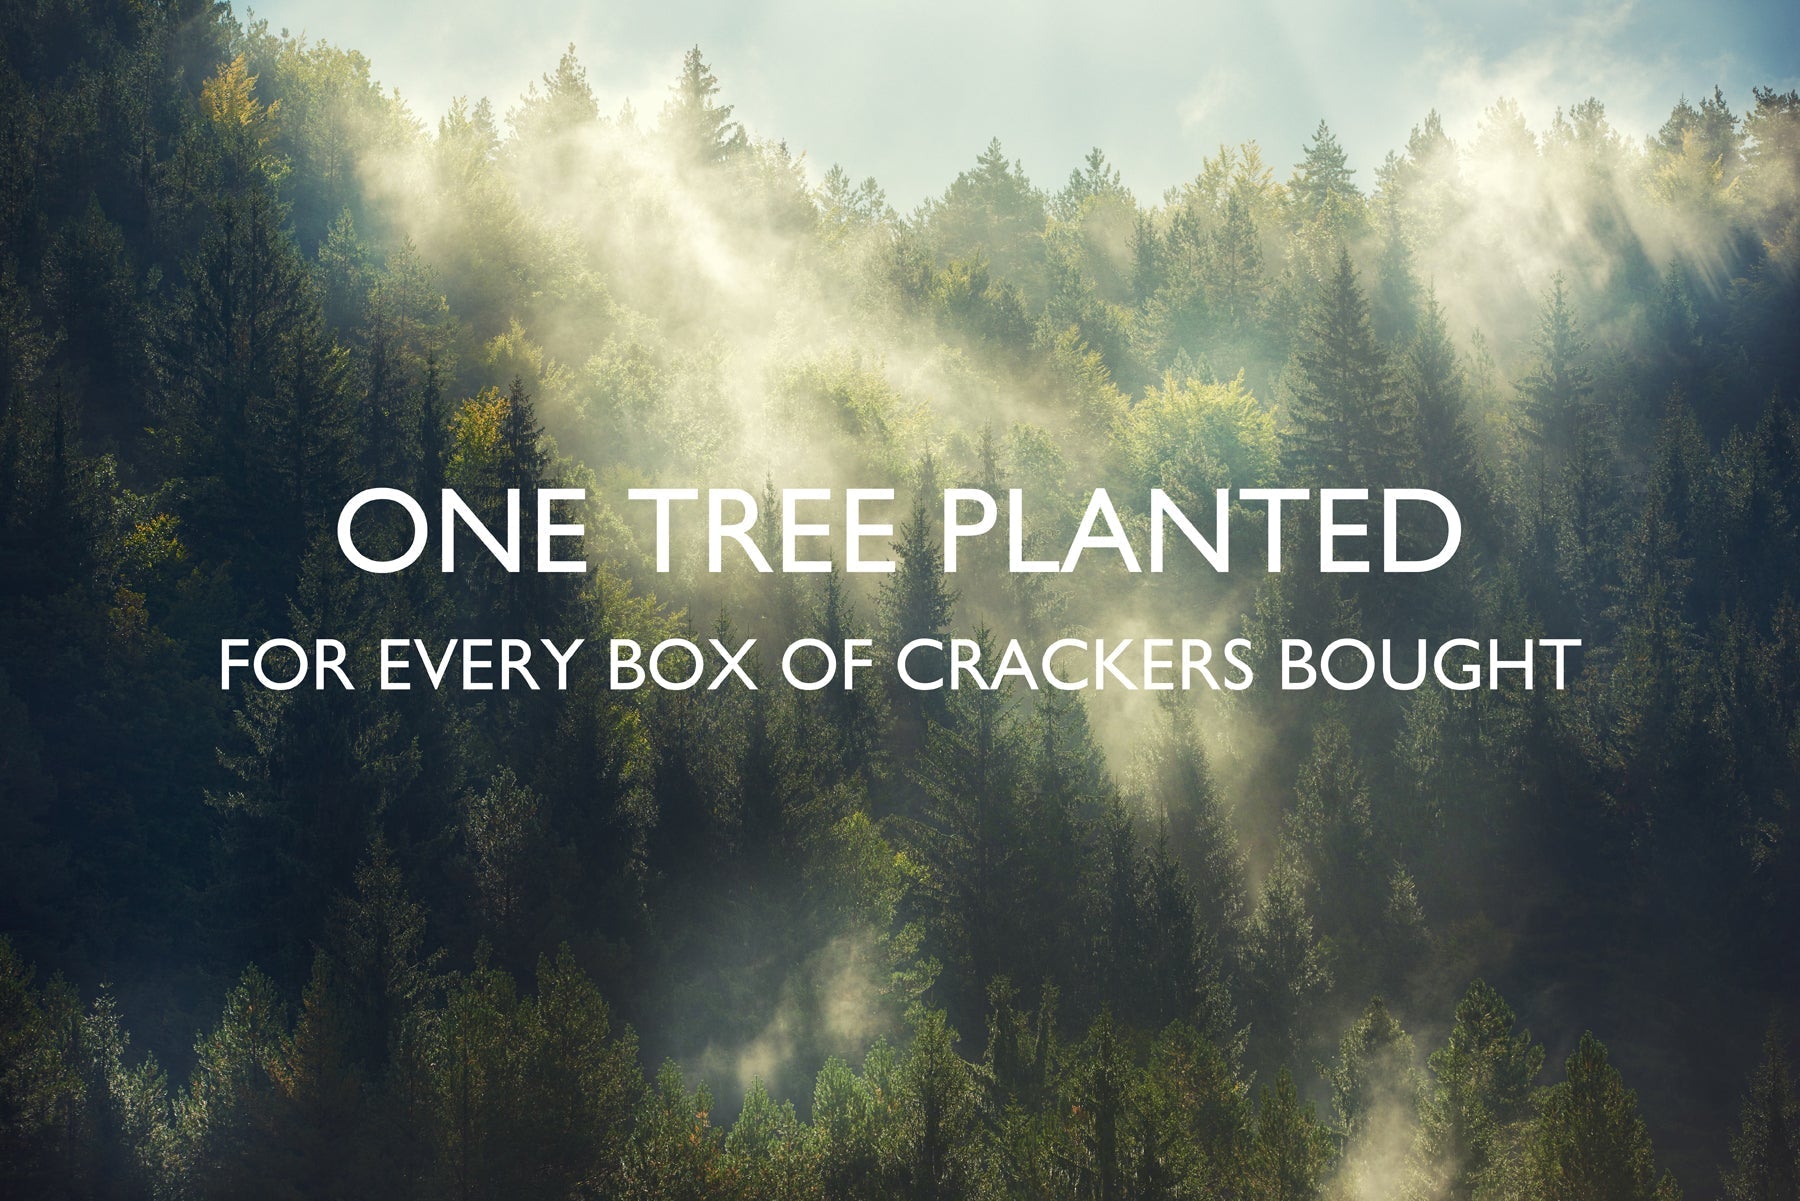 AAA_onetreeplantedforeveryboxofcrackersbought_6by4_d35c3190-855a-4945-84c7-33d4d223f4ef.jpg